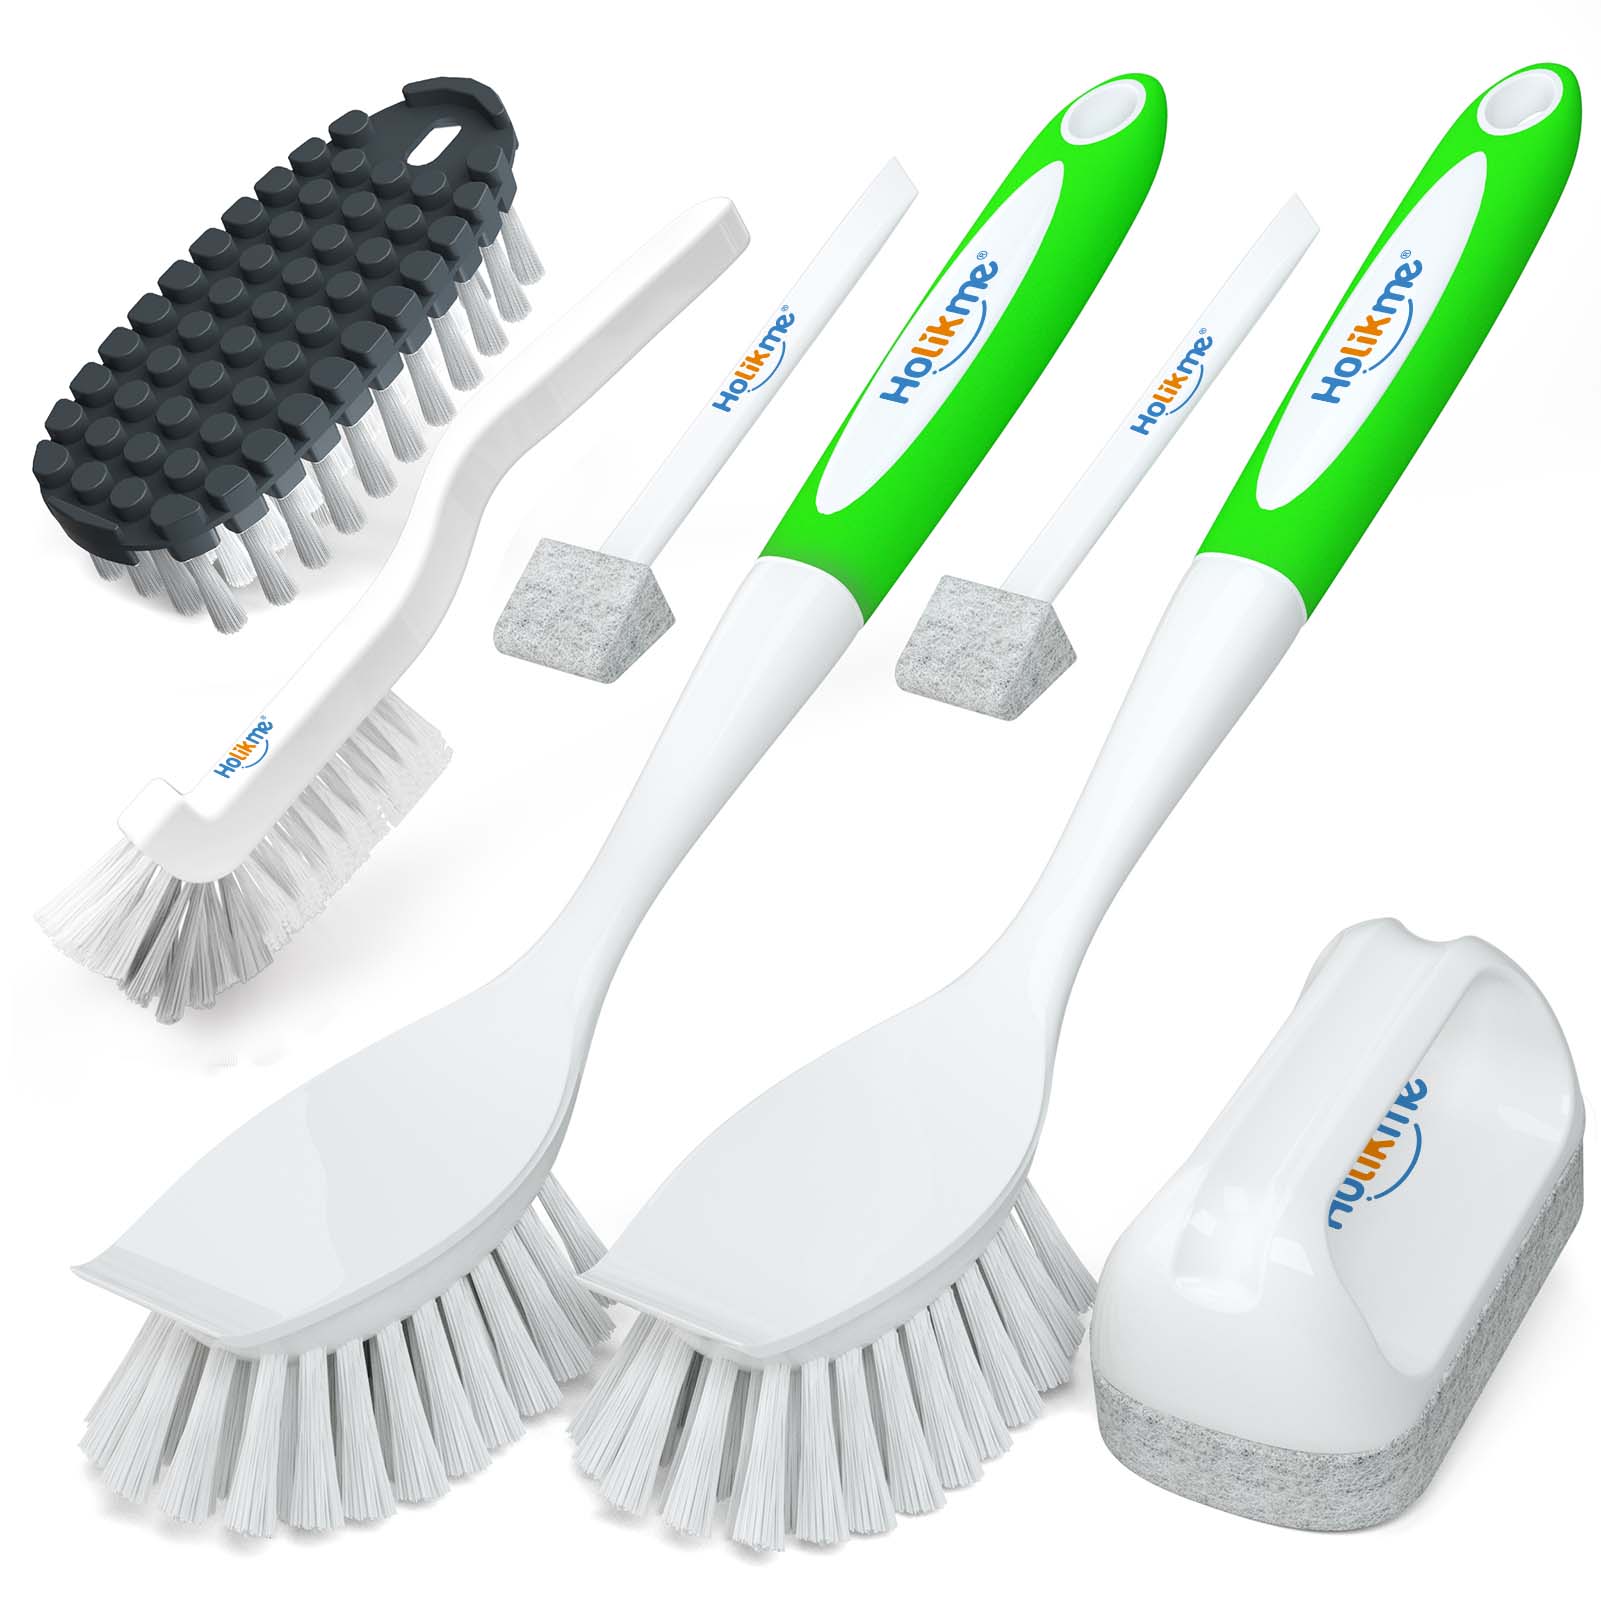 Holikme 7 Pack Kitchen Cleaning Brush Set, Dish Brush for Cleaning